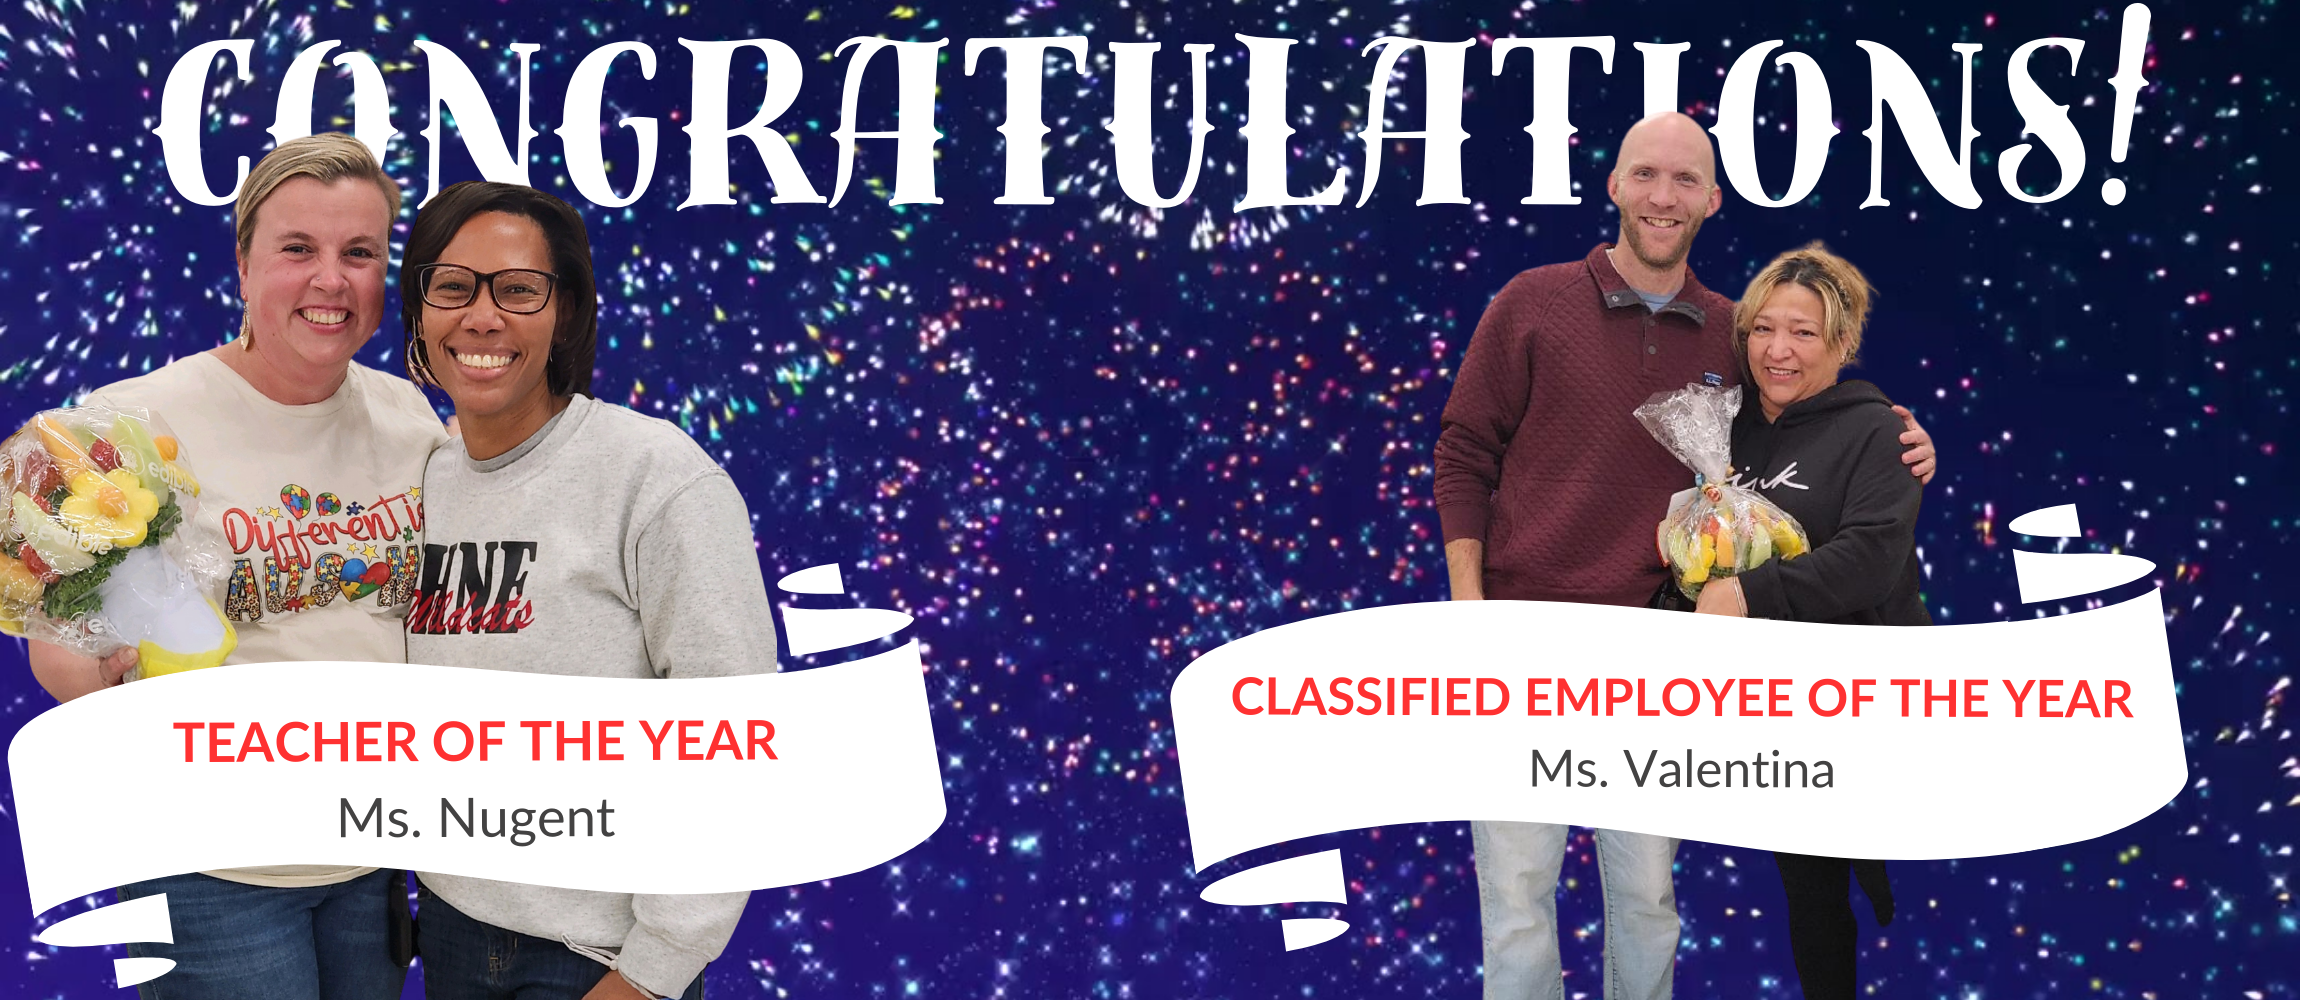 Congratulatory banner recognition the Teacher of the Year Ms. Nugent and Classified Employee of the Year Ms. Valentina